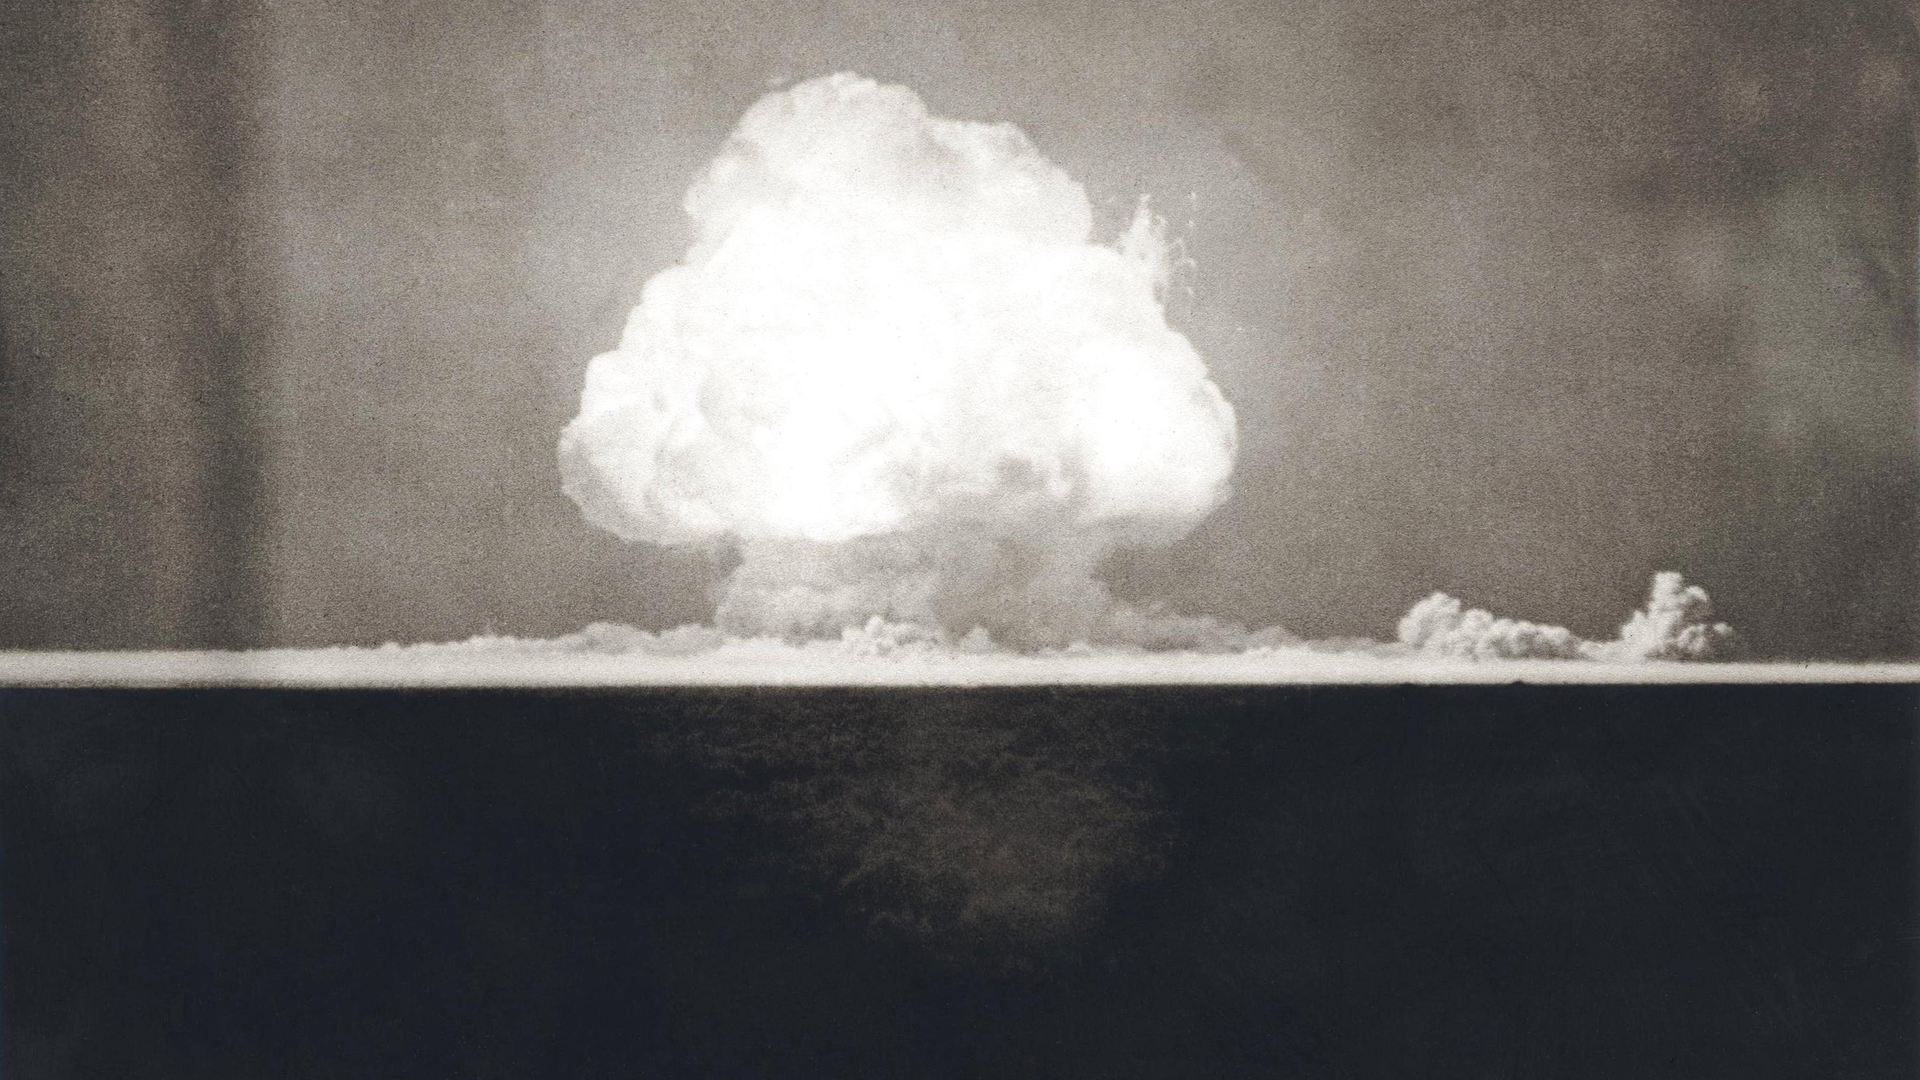 First Atomic Explosion on July 16, 1945. Photograph taken at 9 seconds after the initial Trinity detonation shows the Mushroom cloud. Manhattan Project, World War 2. Alamogordo, New Mexico.